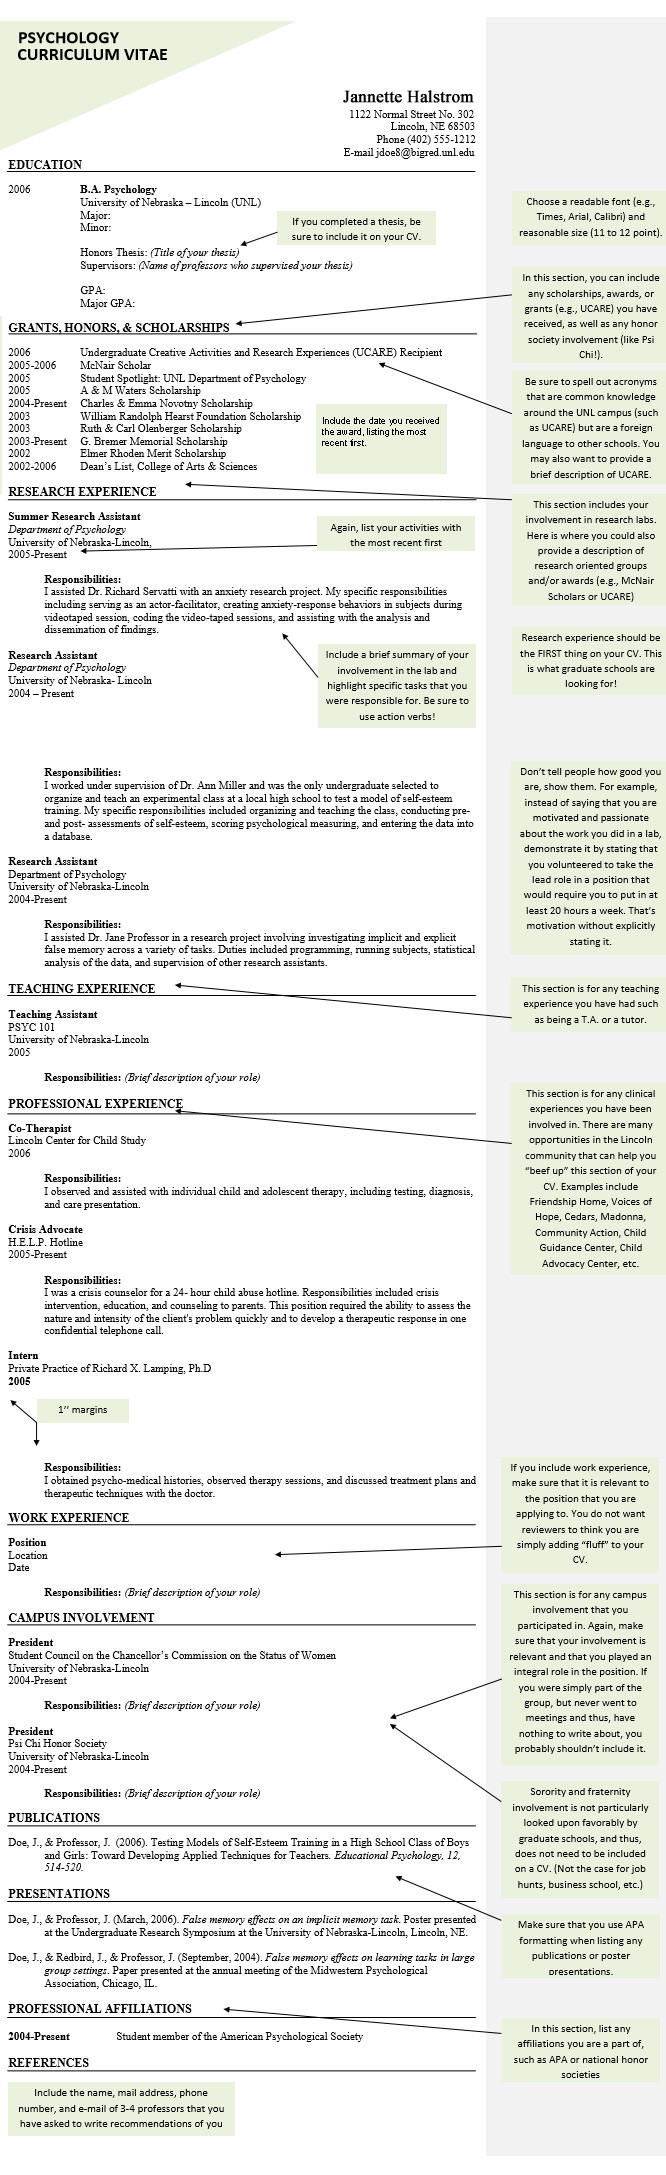 Sample Resume for Psychology Graduate School Psychology Cv and Resume Samples, Templates and Tips